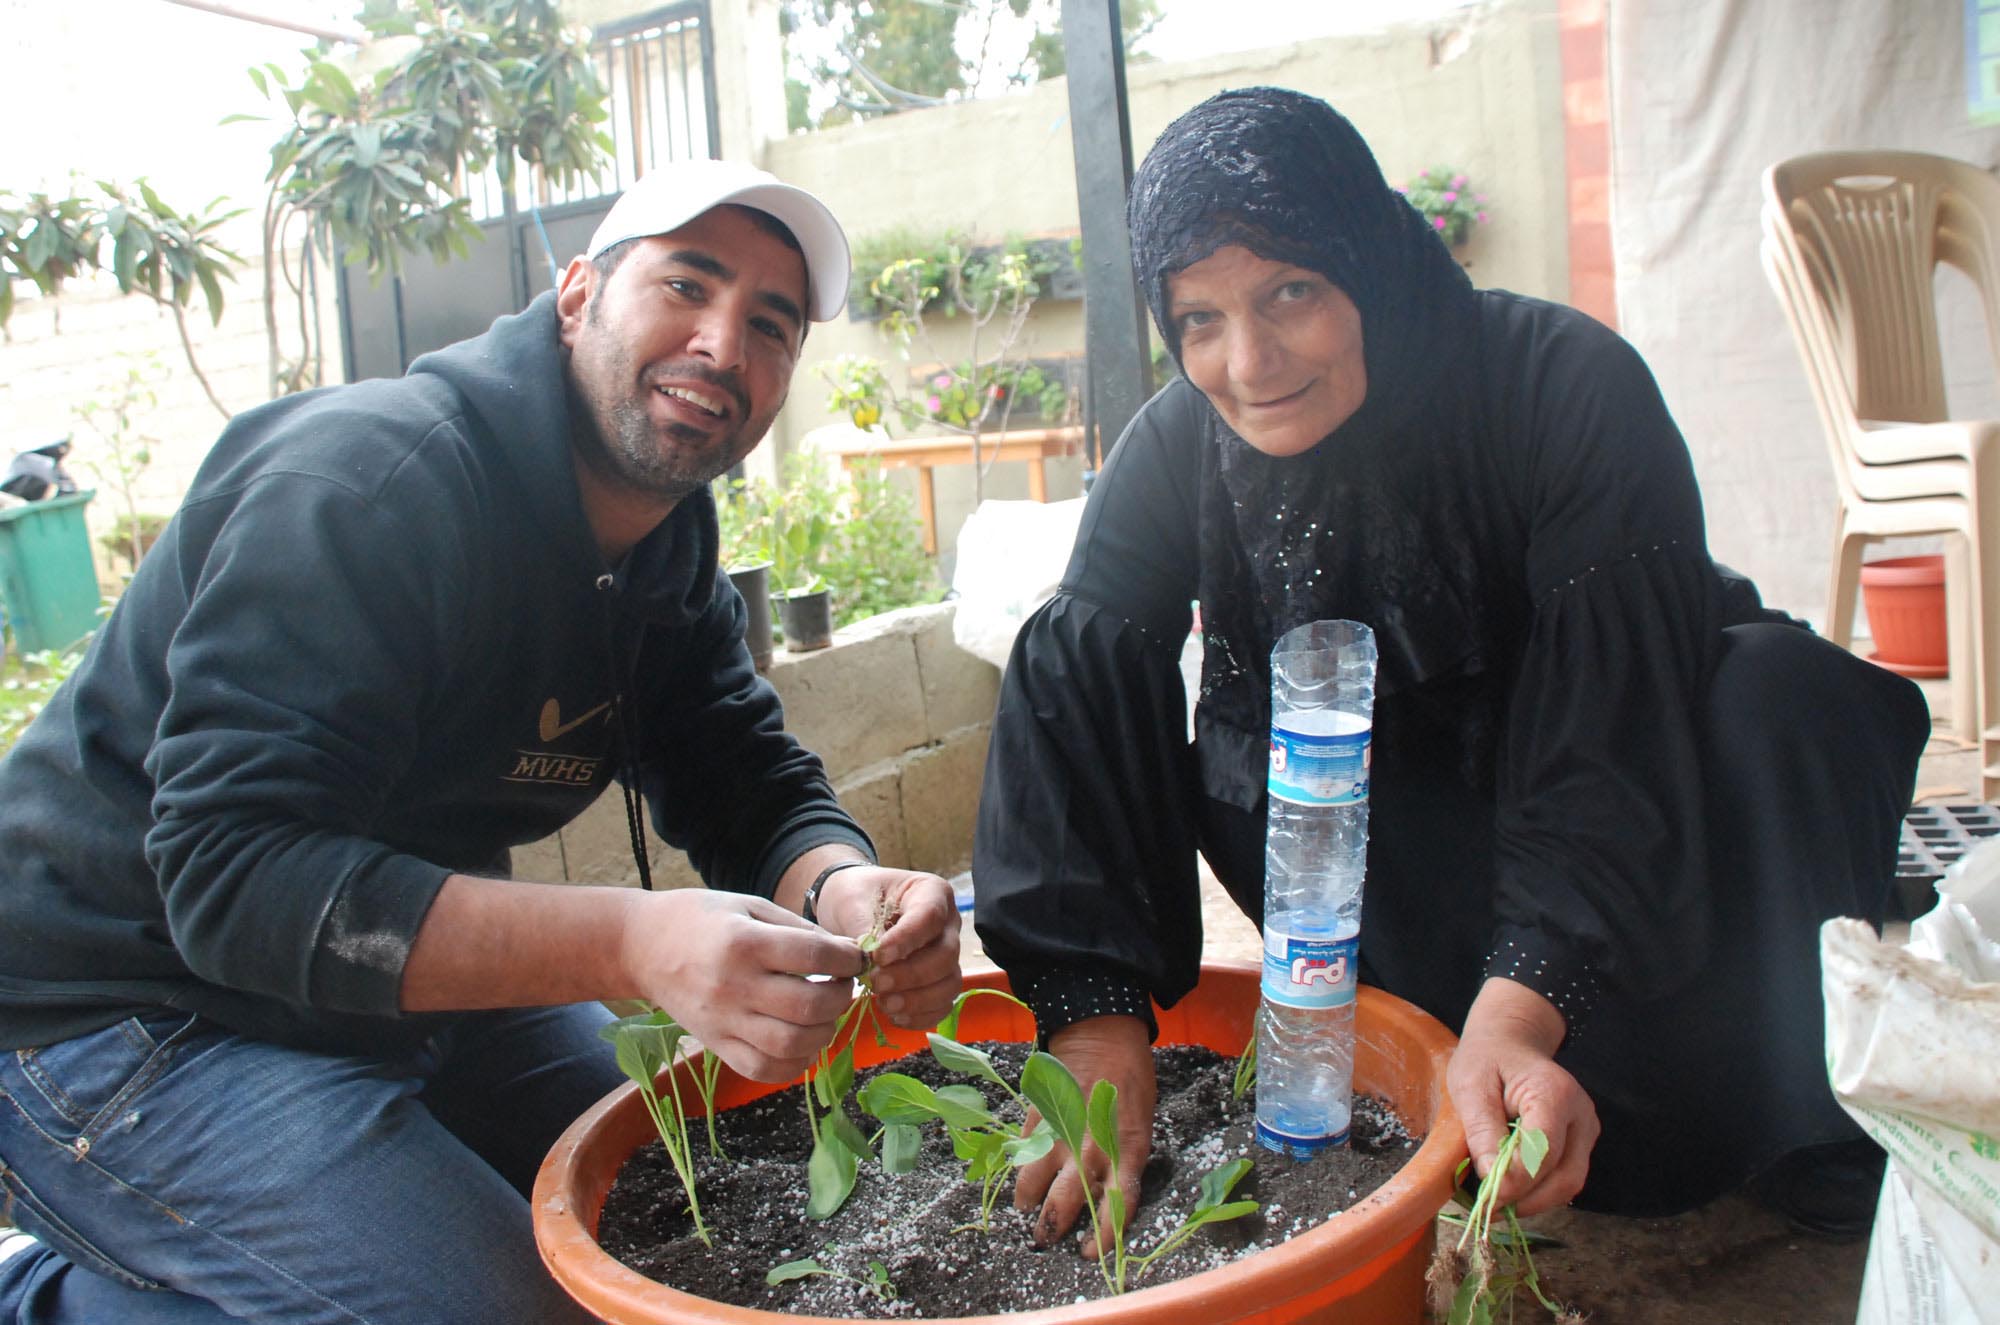 Participants in Anera's rooftop gardening workshop learn to use old plastic bottles and other recycled items to plant and water a variety of vegetables and small fruit trees.